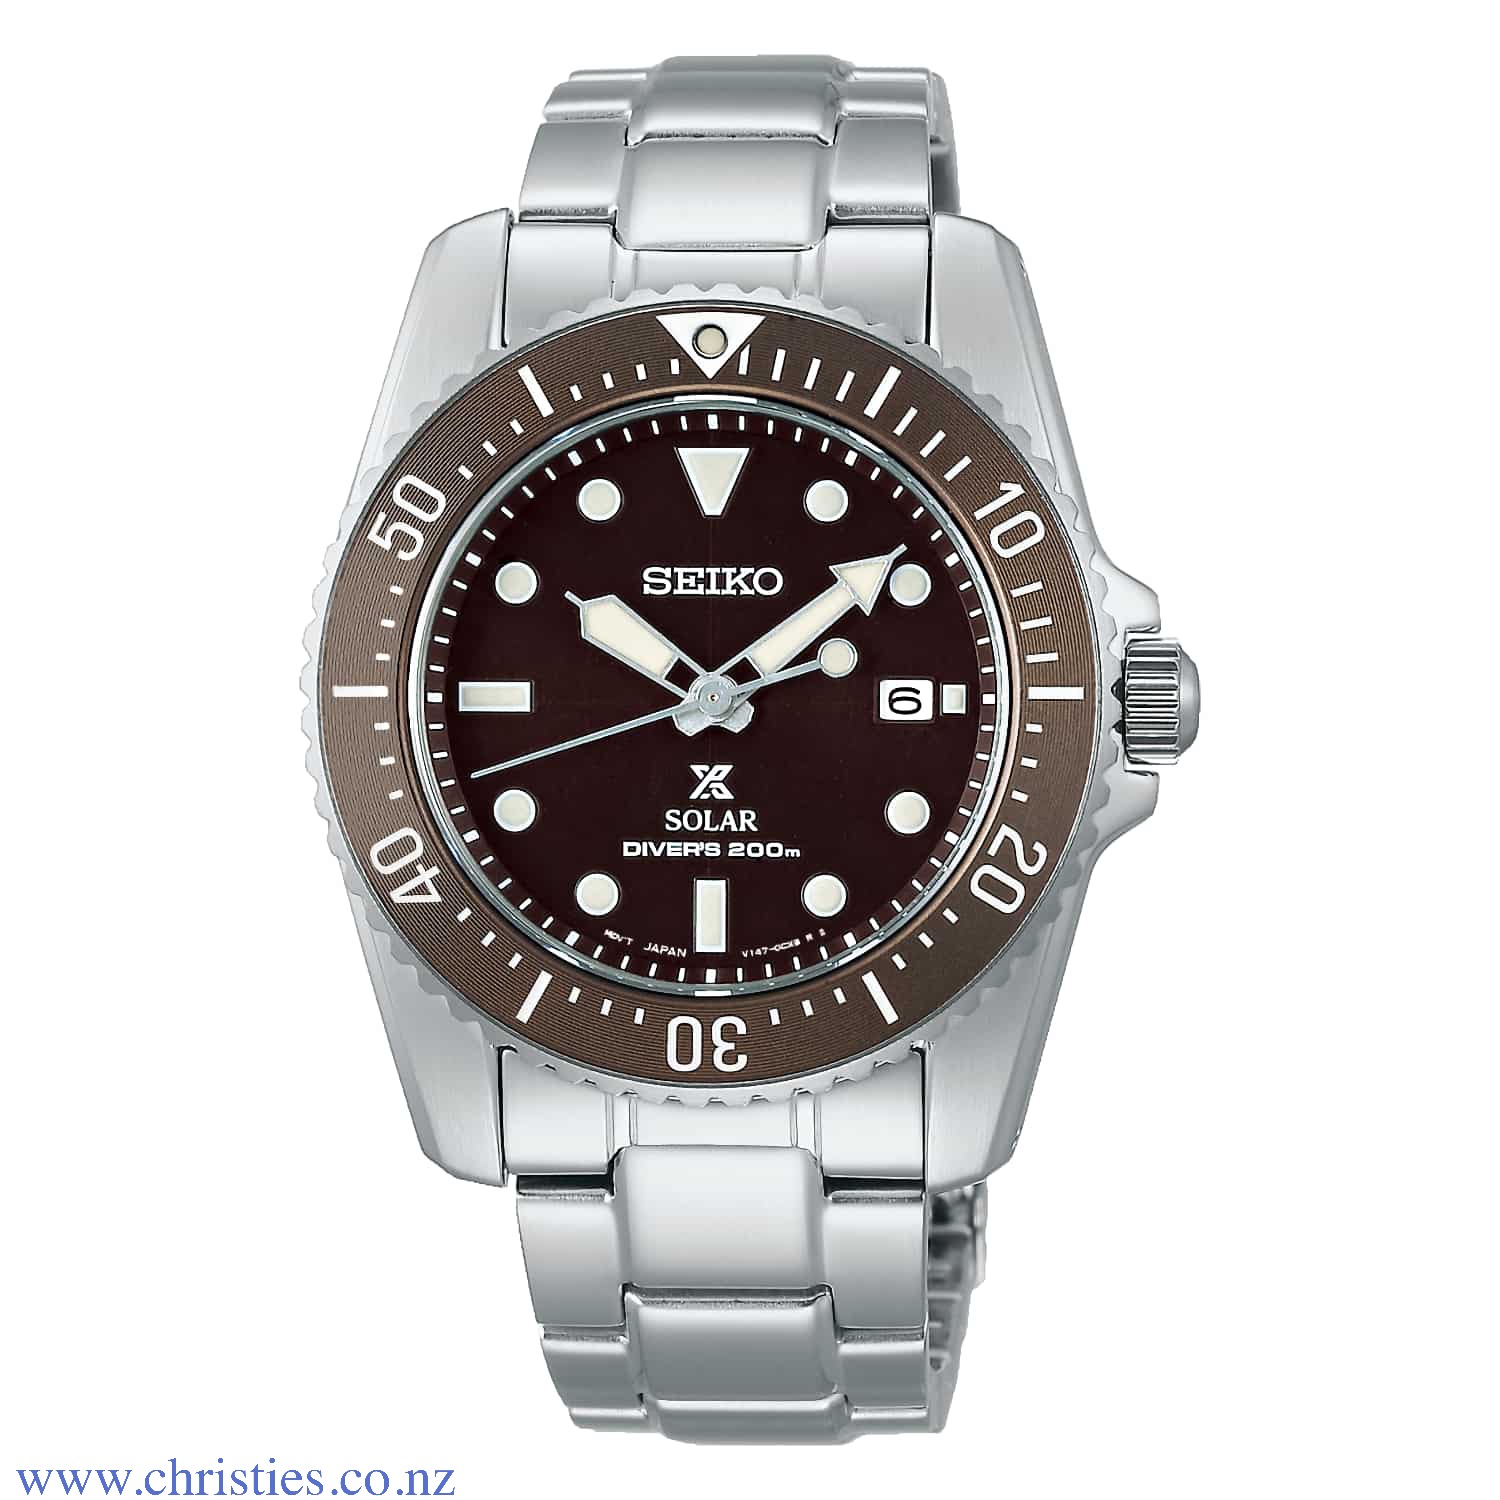 SNE571P1 Seiko Solar Prospex Dive Watch. SNE571P1 Seiko Solar Prospex Dive Watch Afterpay - Split your purchase into 4 instalments - Pay for your purchase over 4 instalments, due every two weeks. You’ll pay your first installment at the time of purc buy s